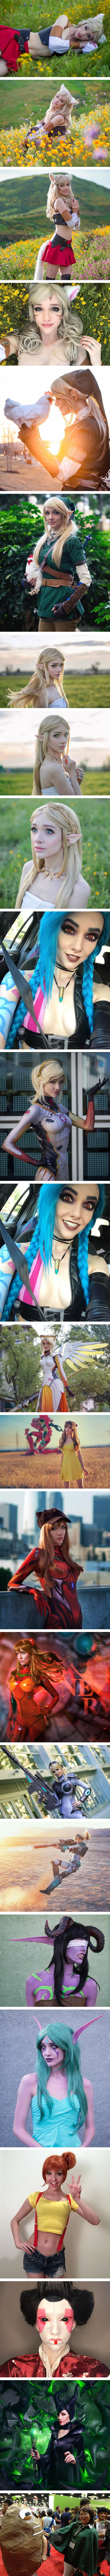 Please meet Lyz Brickley, the cosplayer who nails every characters